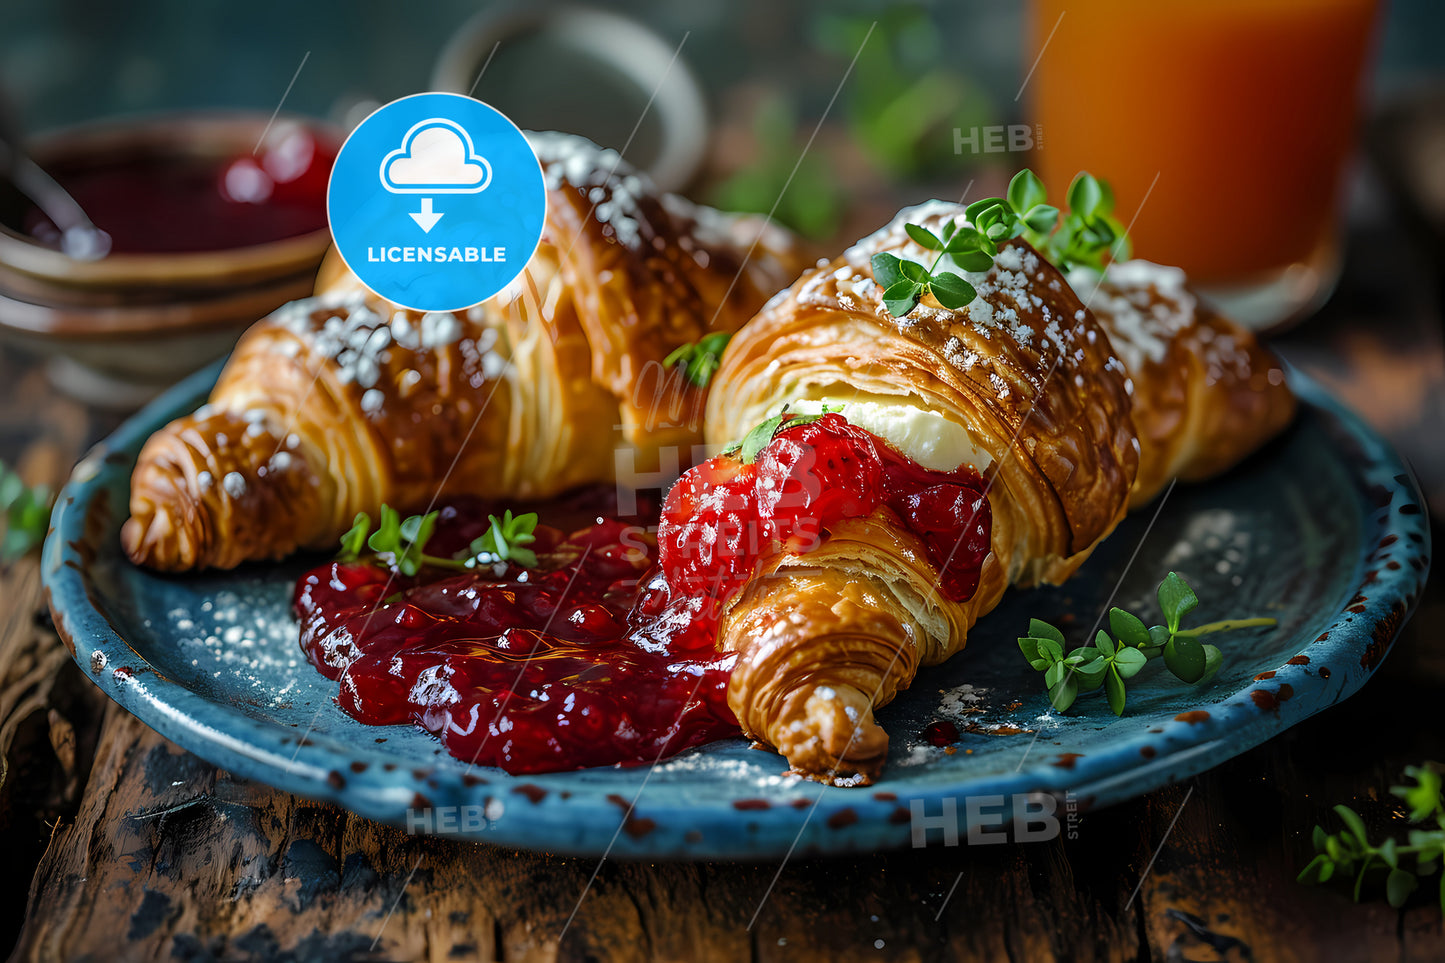 Fresh Croissant, A Plate Of Croissants With Jam And Mint